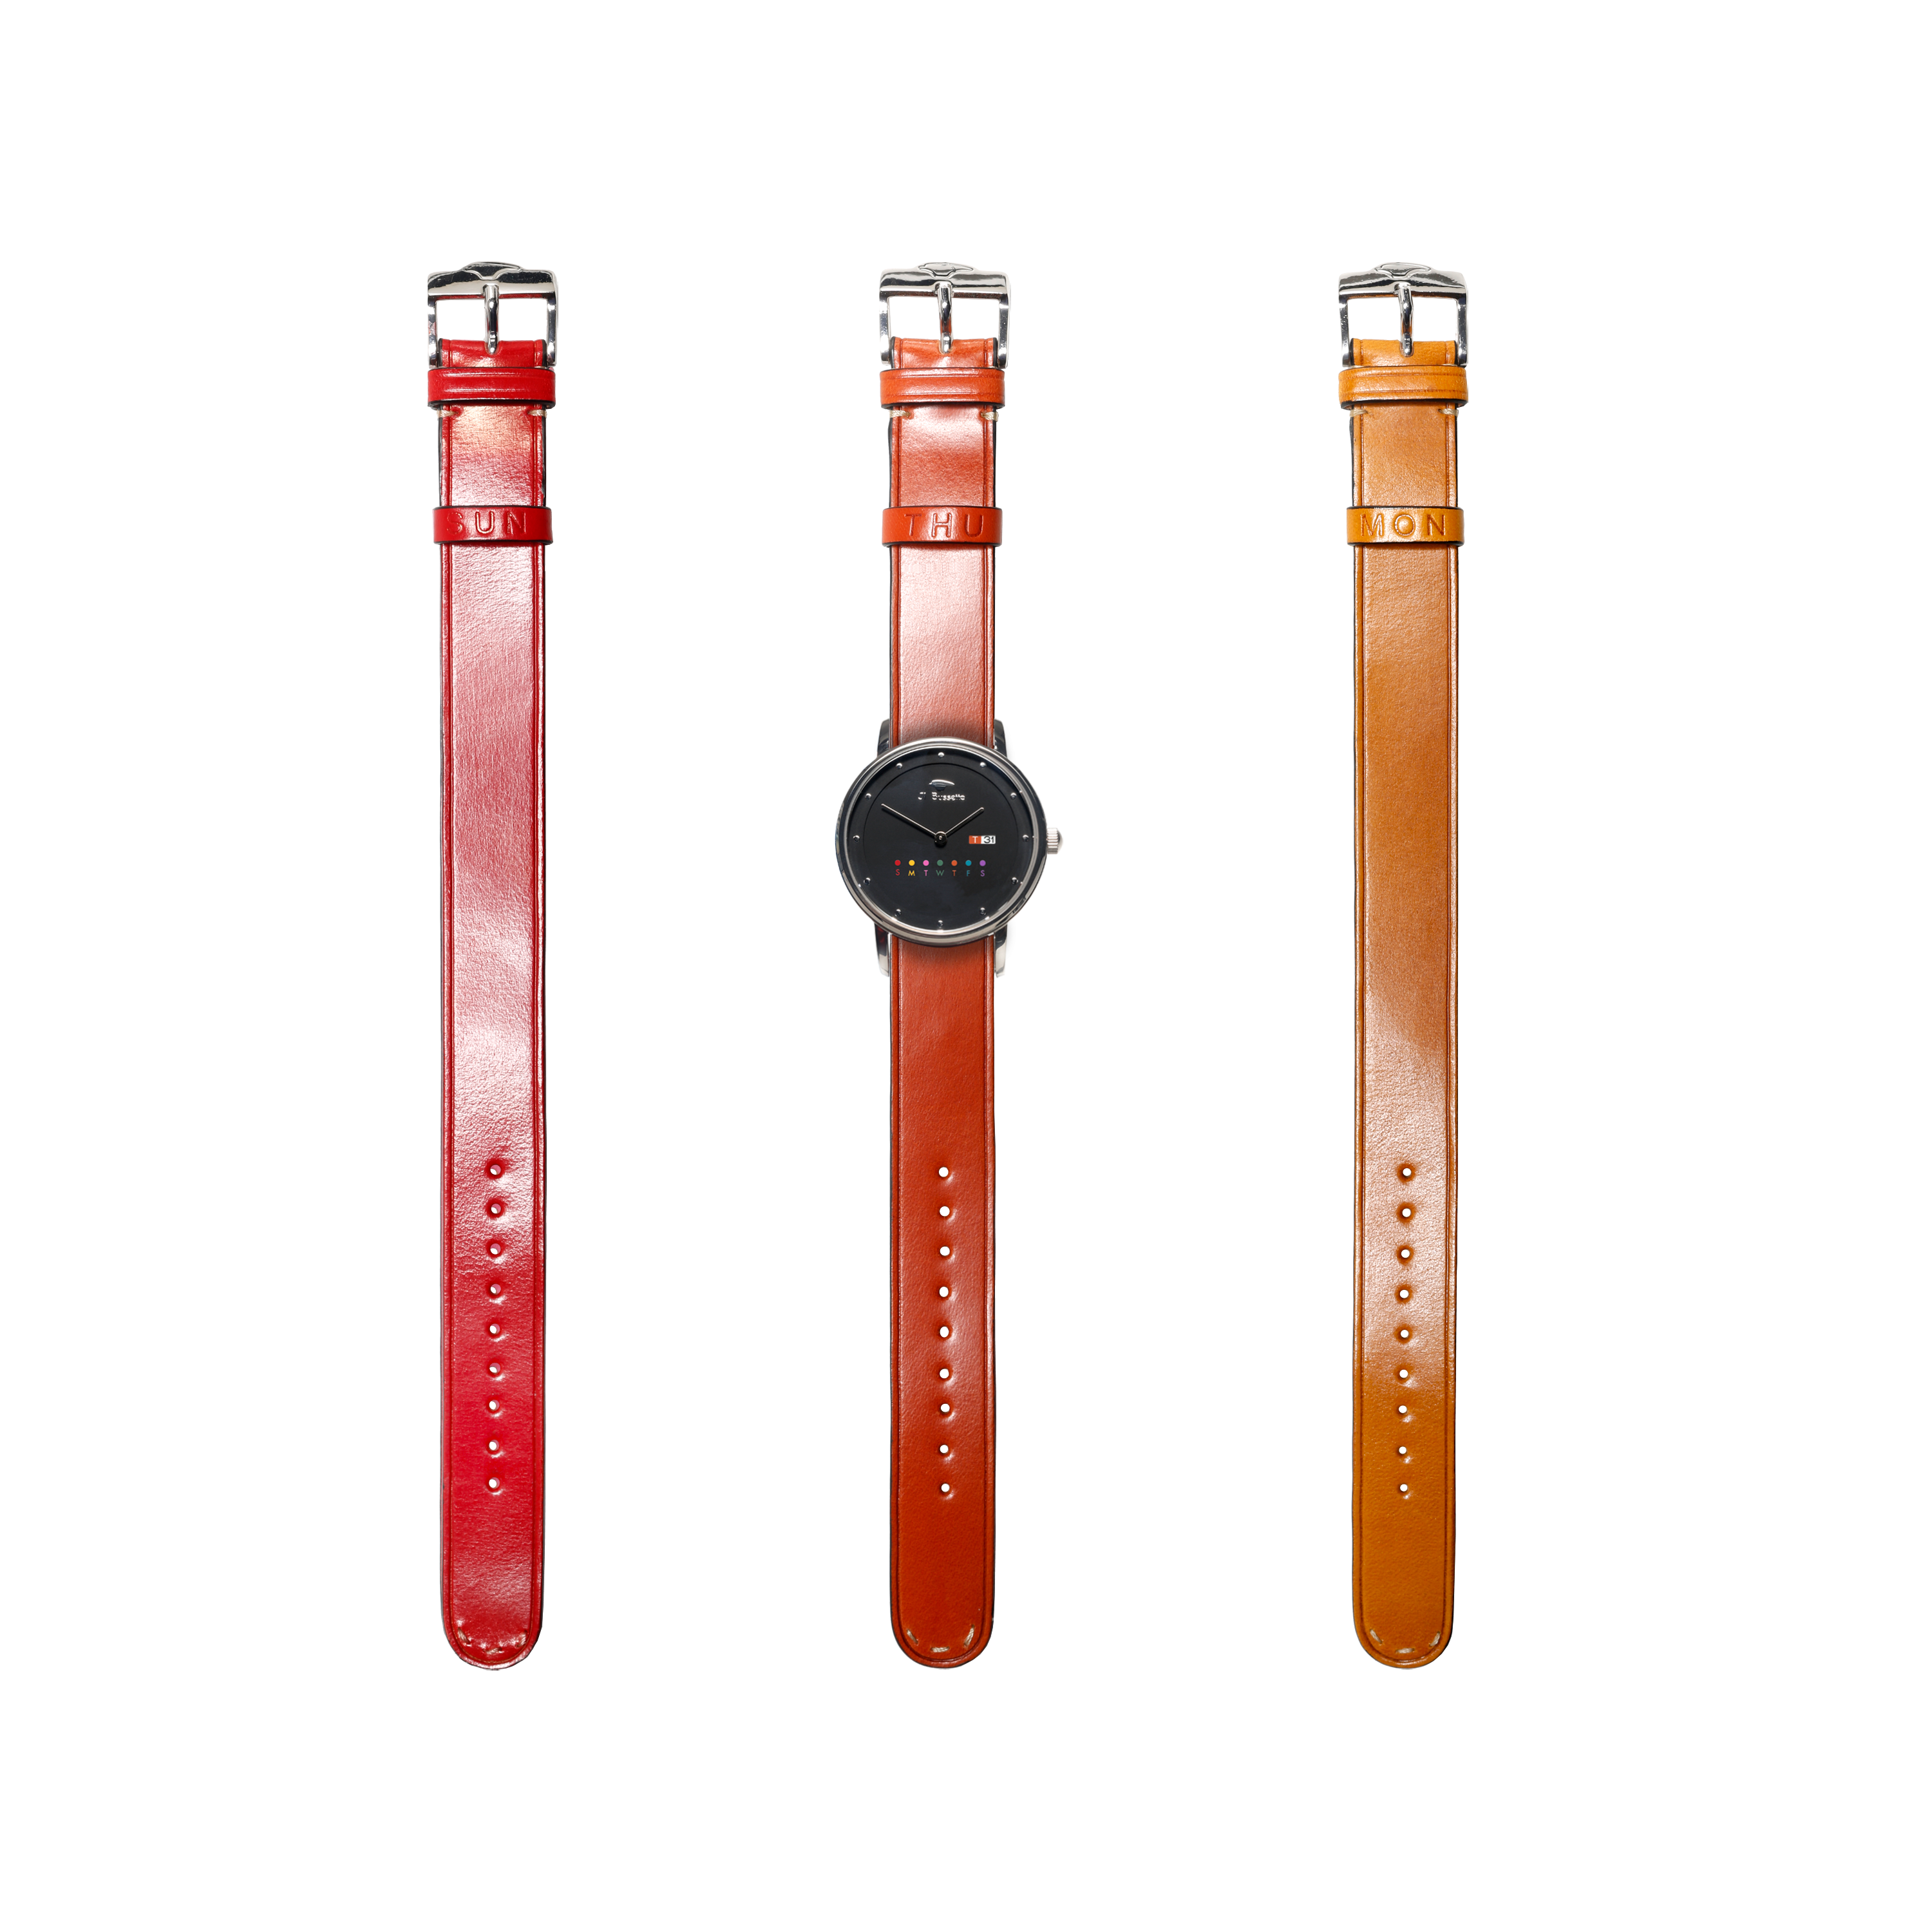 Watch + 3 Leather Watch Straps